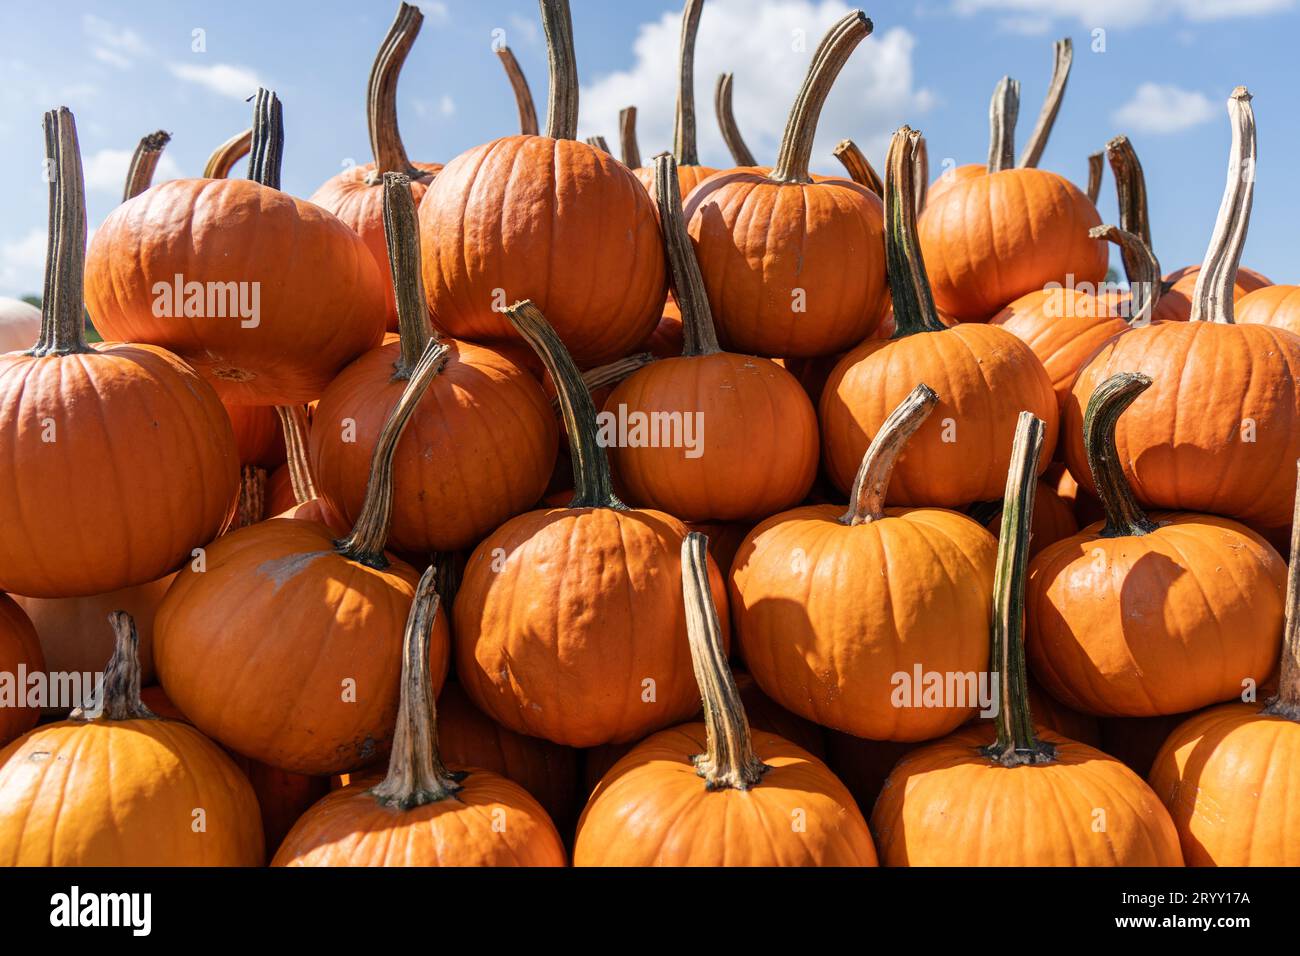 Bright orange pumpkins on display at local farmer’s market  ready for fall decorating. Stock Photo